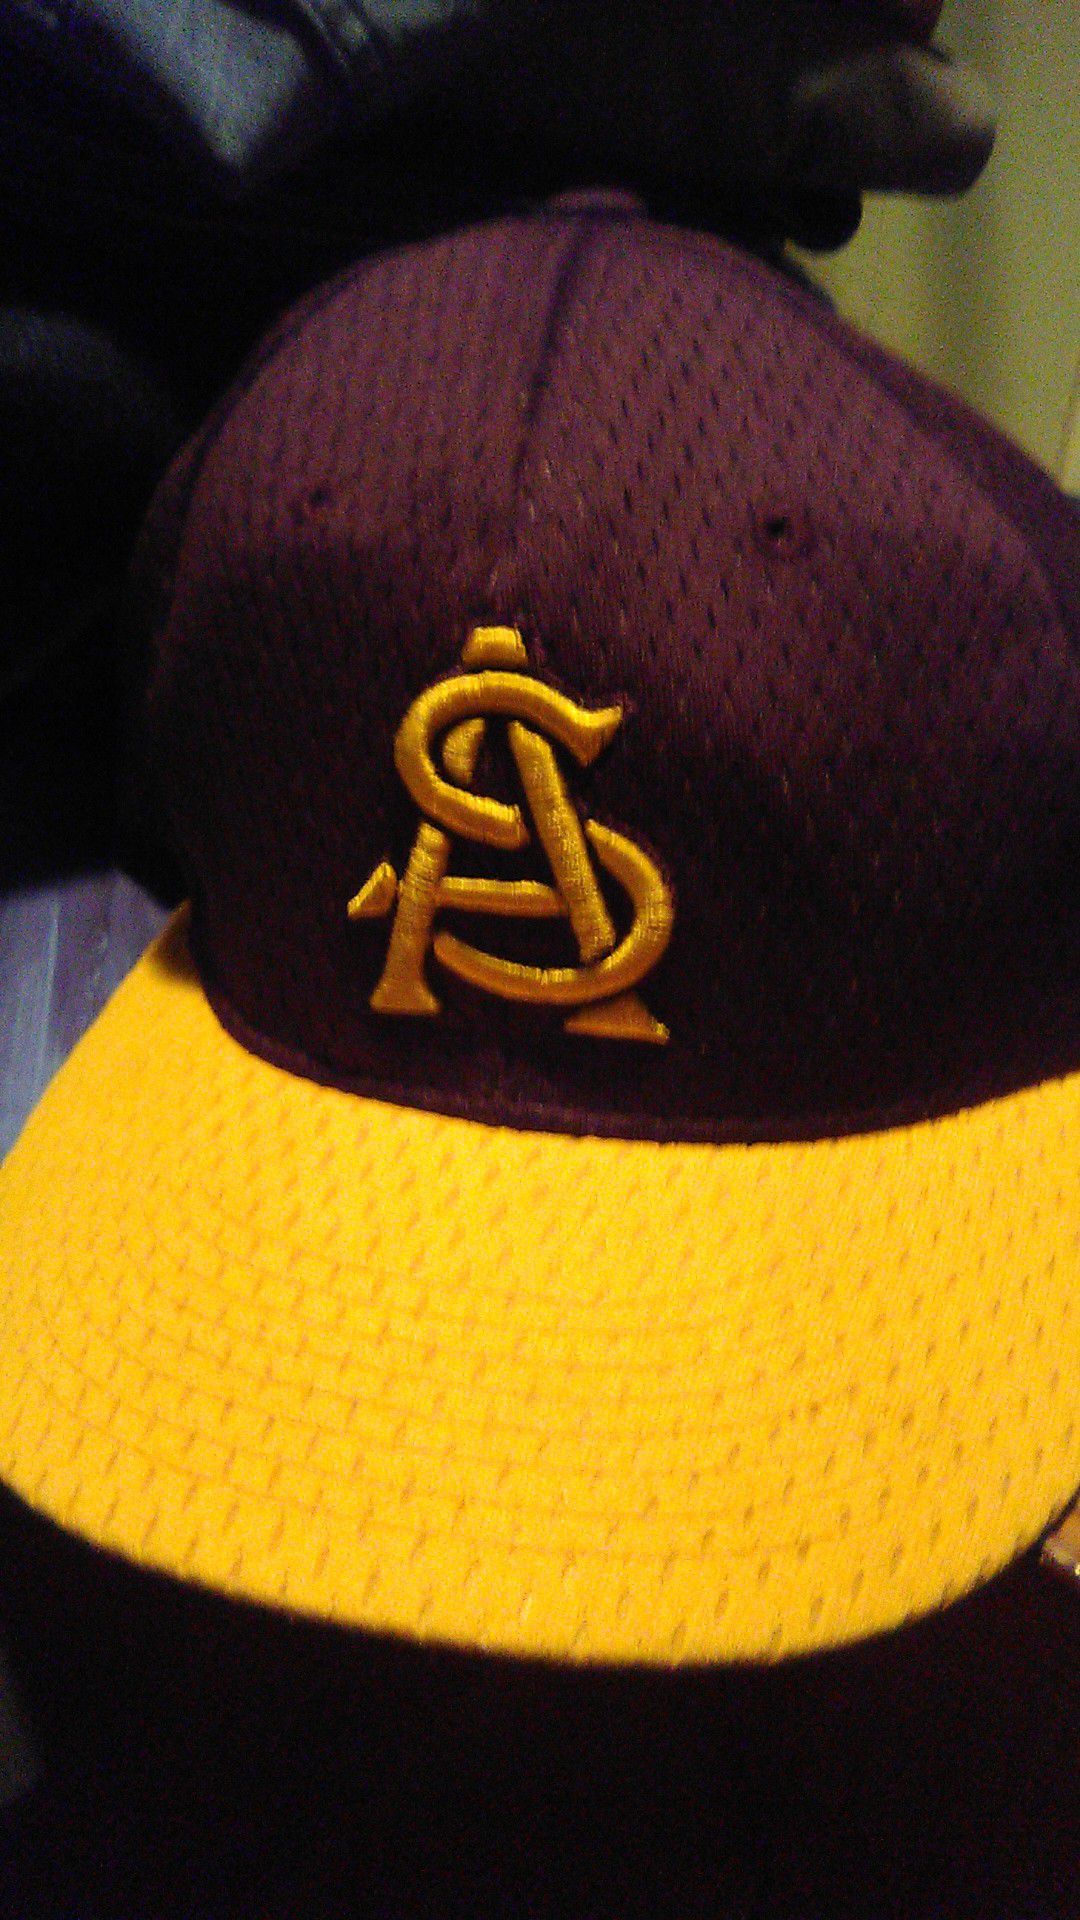 Fitted ASU hat brand new